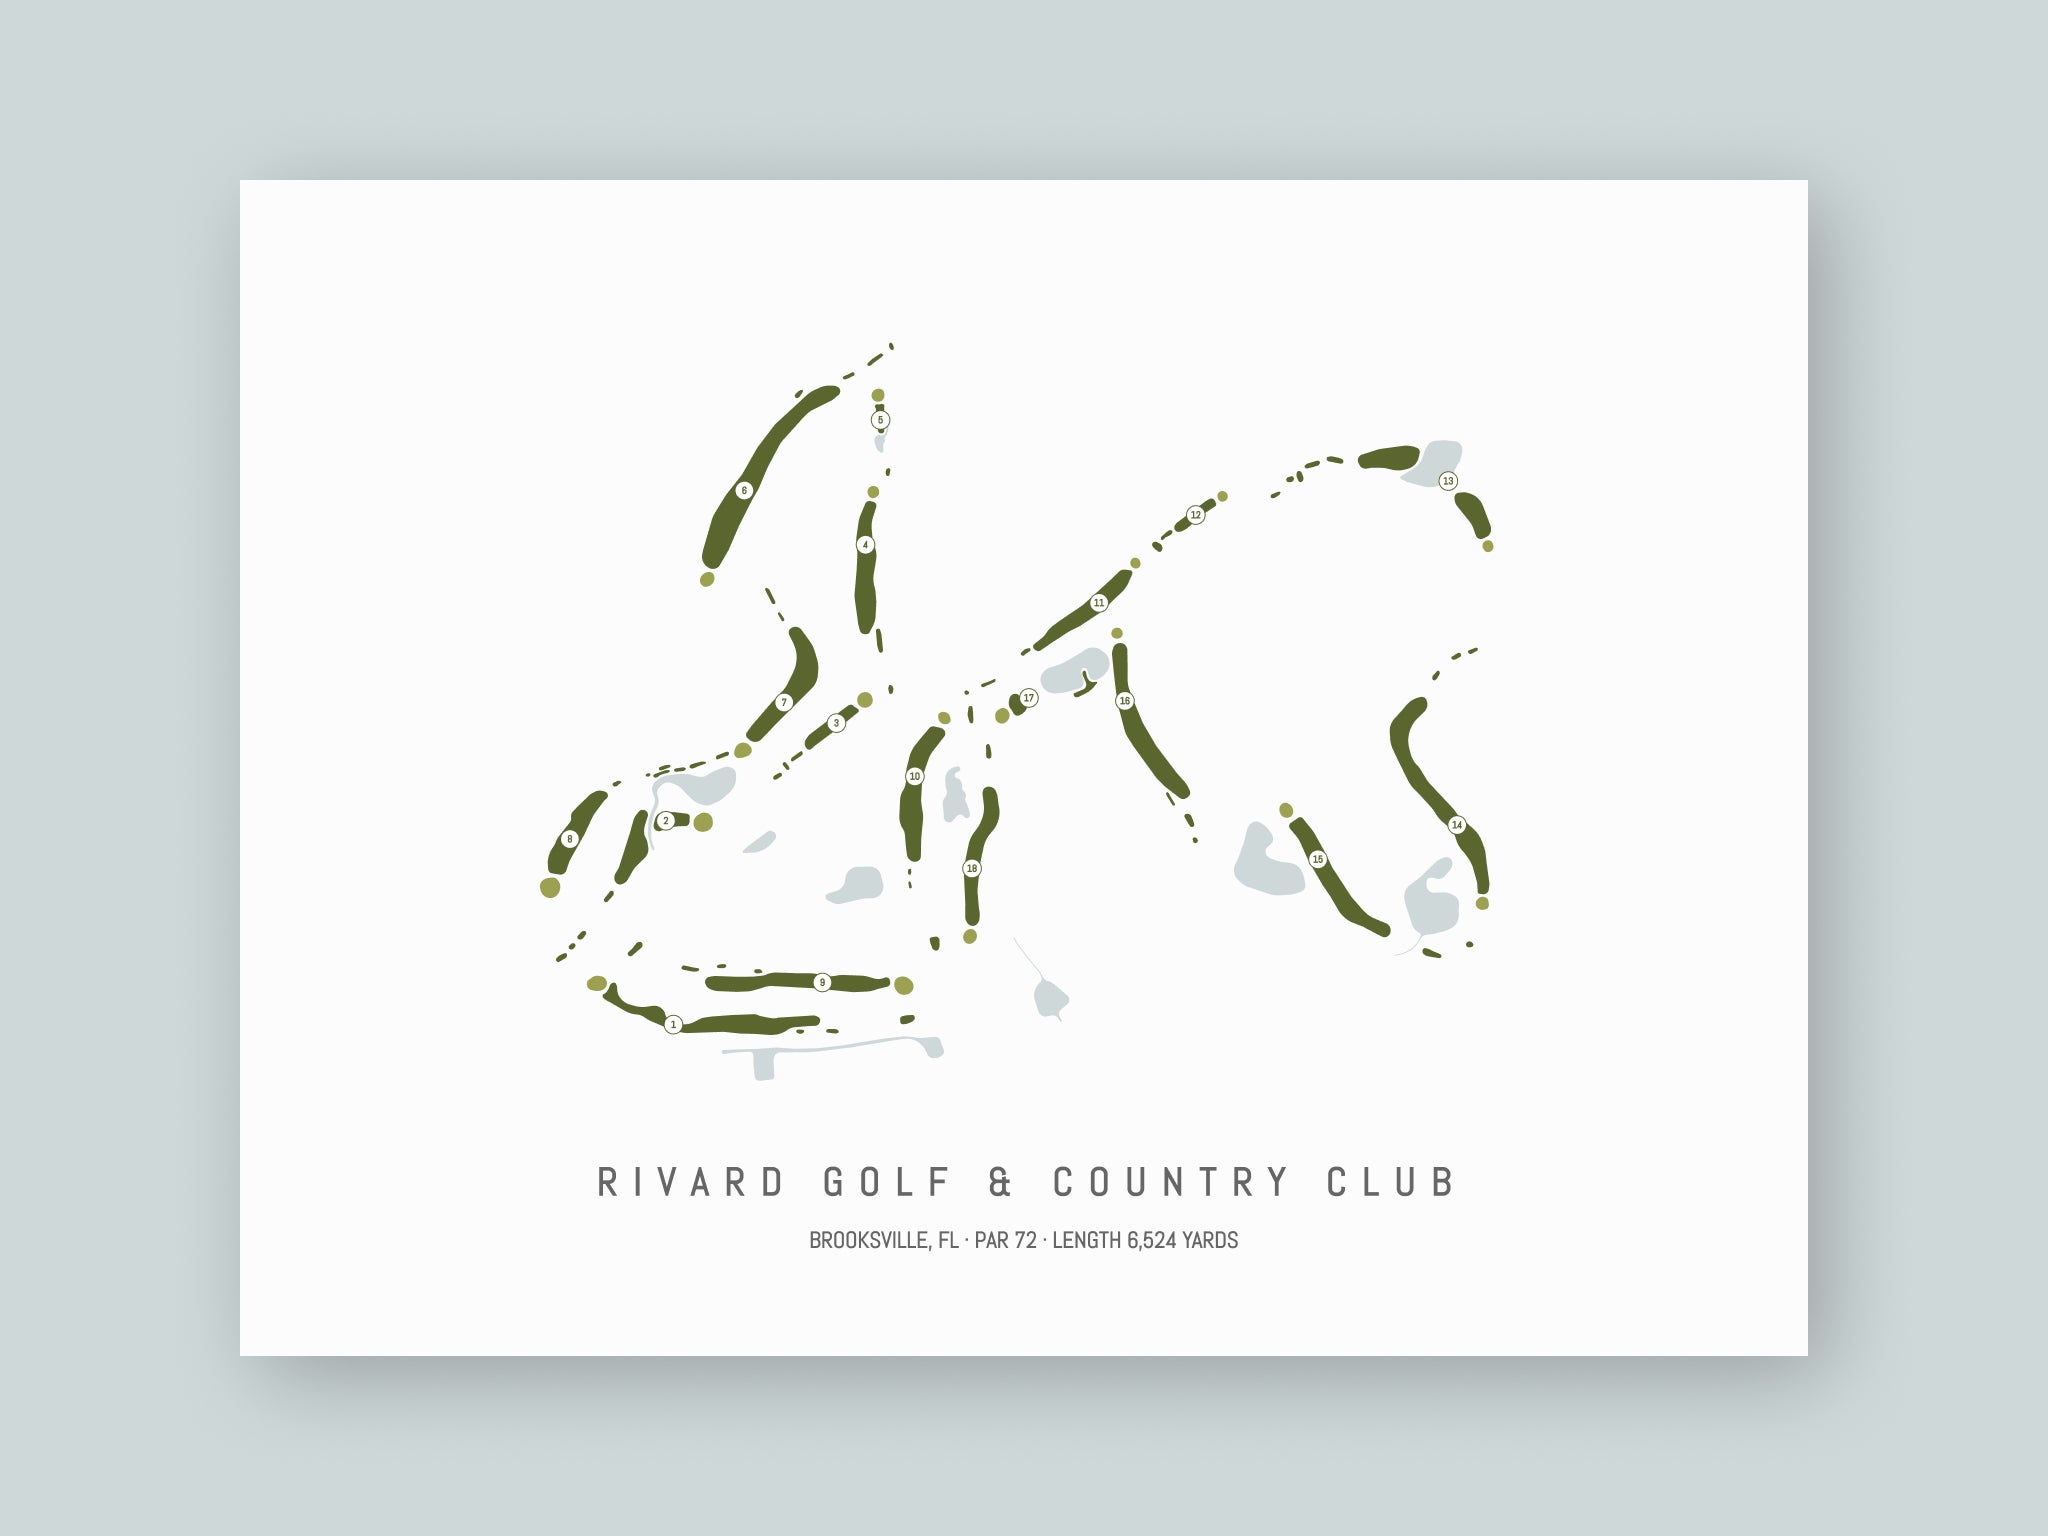 Rivard-Golf-And-Country-Club-FL--Unframed-24x18-With-Hole-Numbers